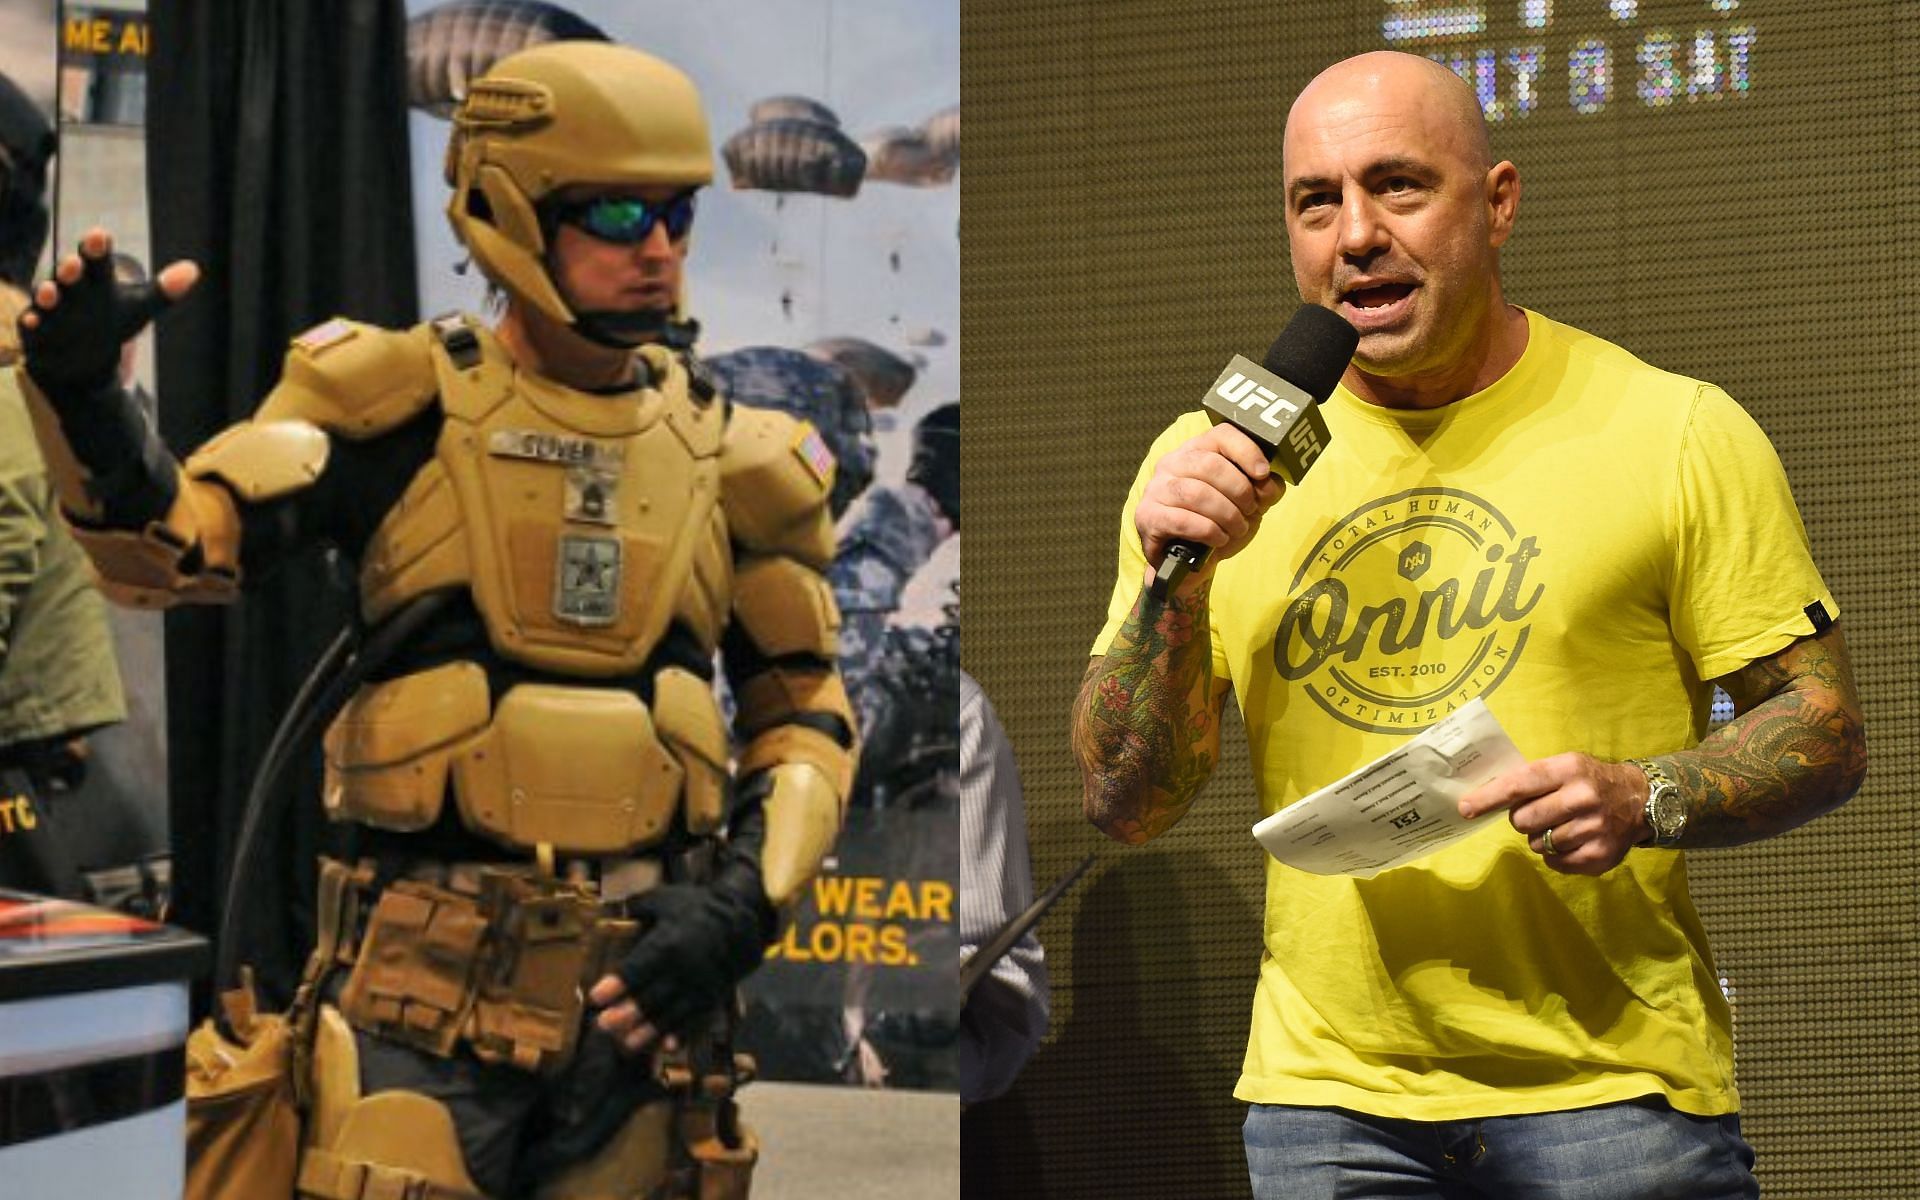 Military suit (left) and Joe Rogan (right) (Images via Twitter/@NavyTimes and Getty)